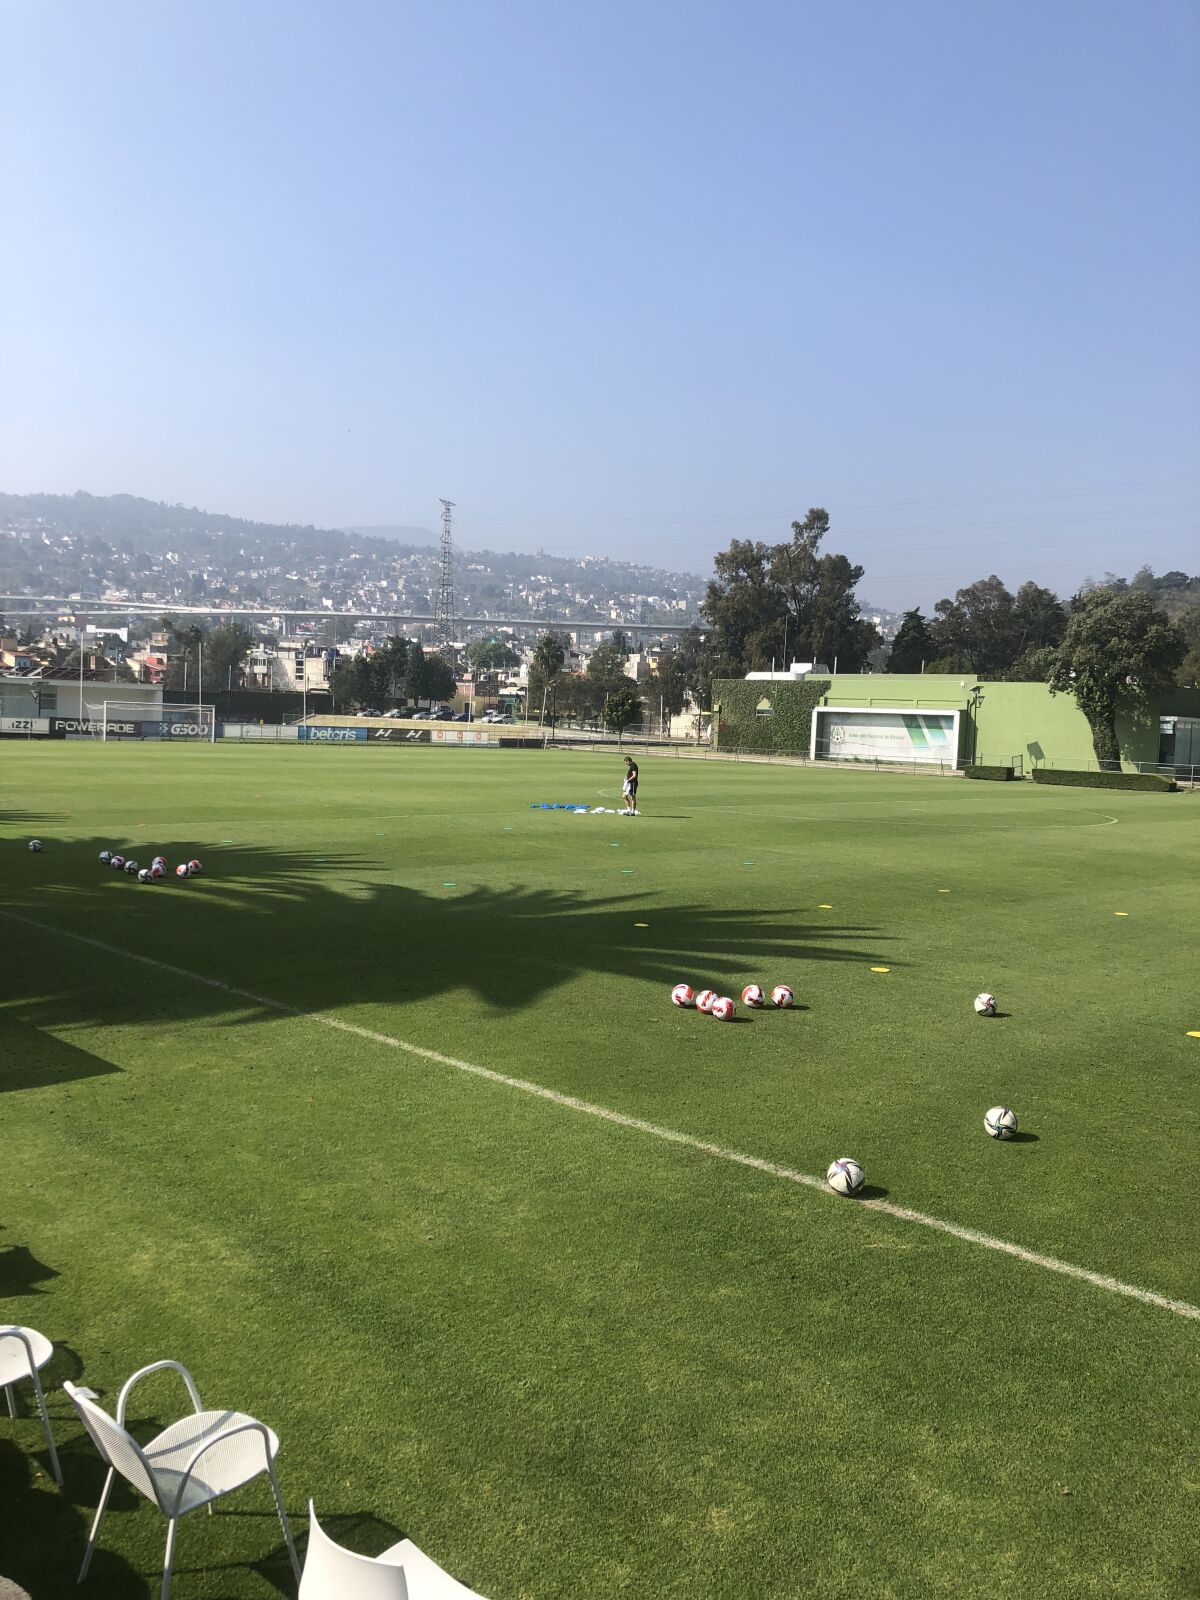 A view of the Mexican soccer team's elite training facility.